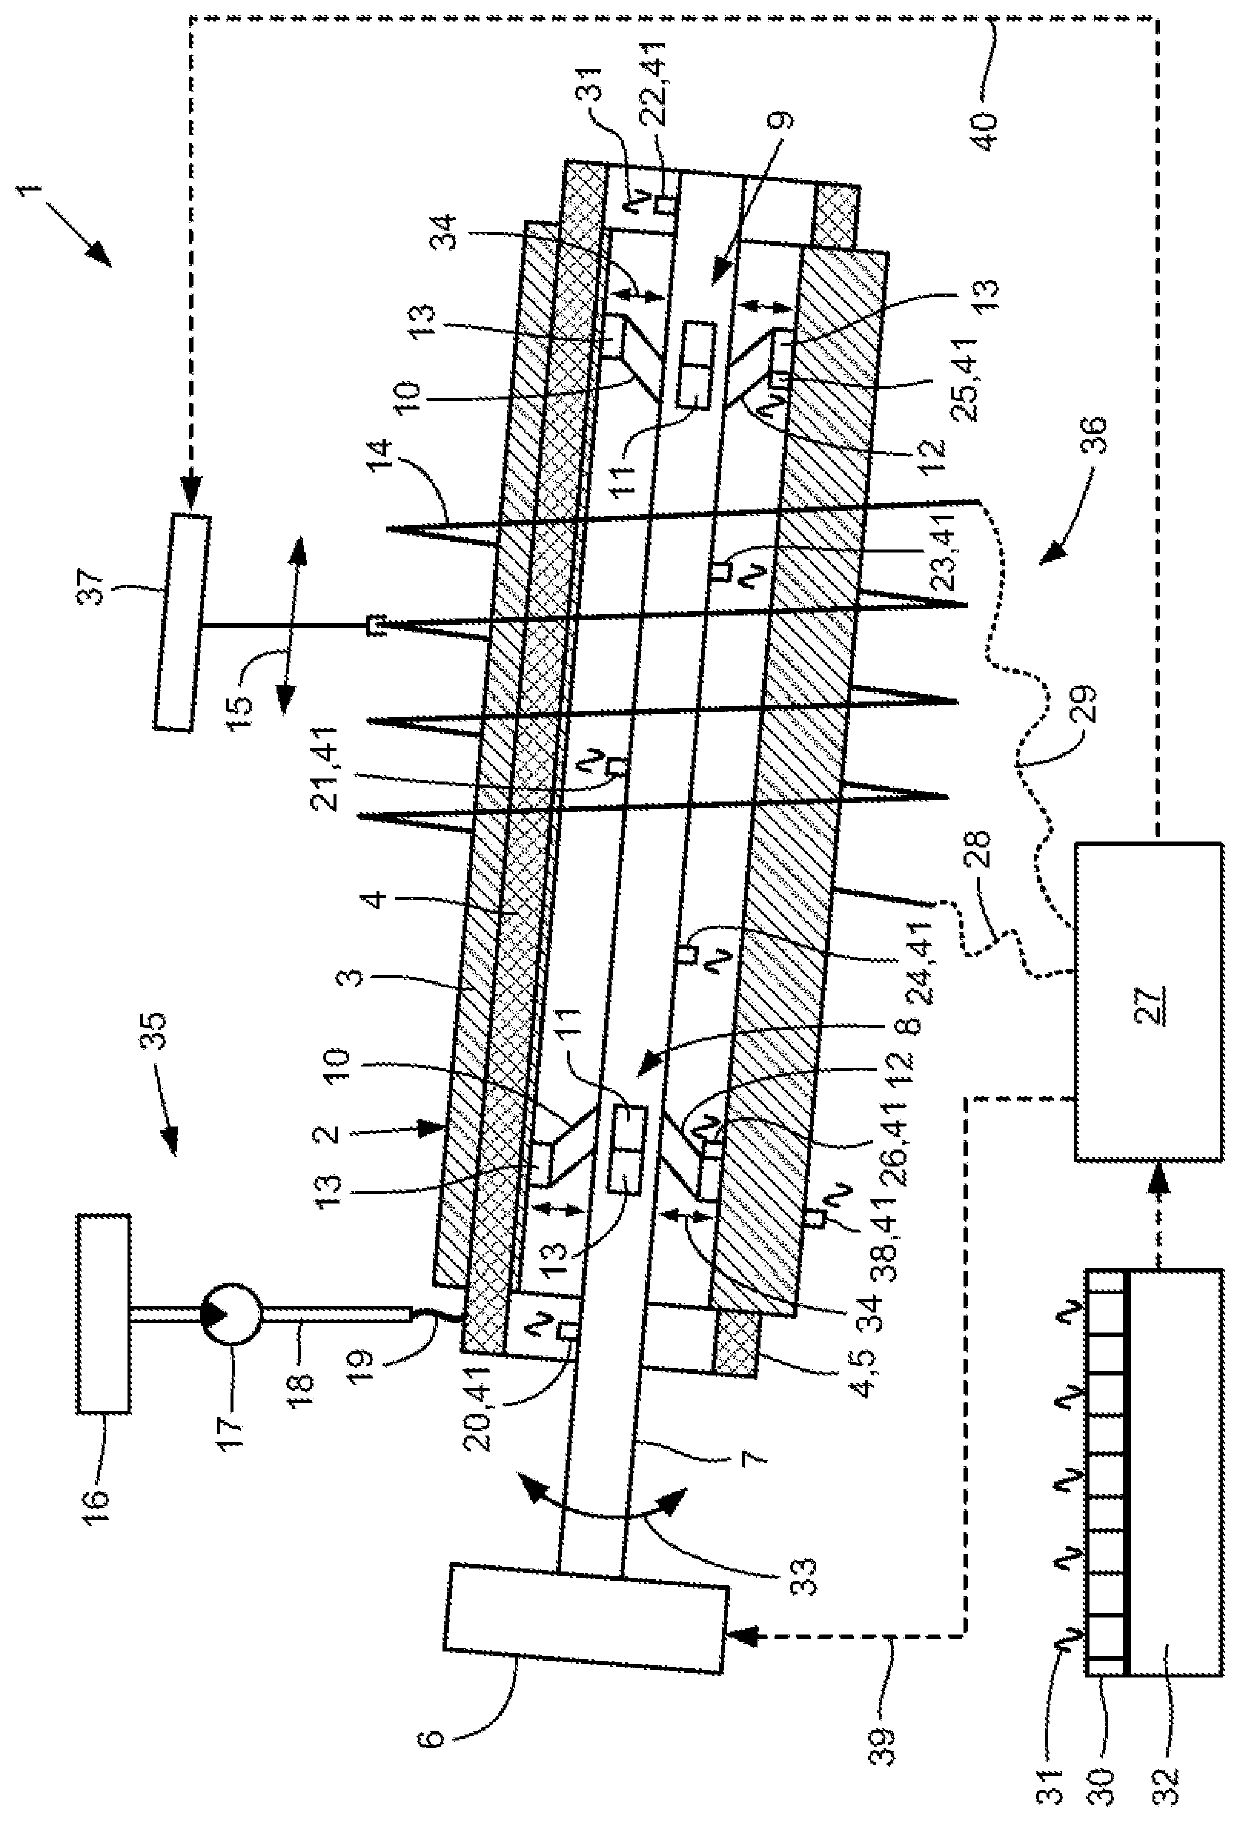 Impregnation device for trickle impregnation of a stator of an electric machine